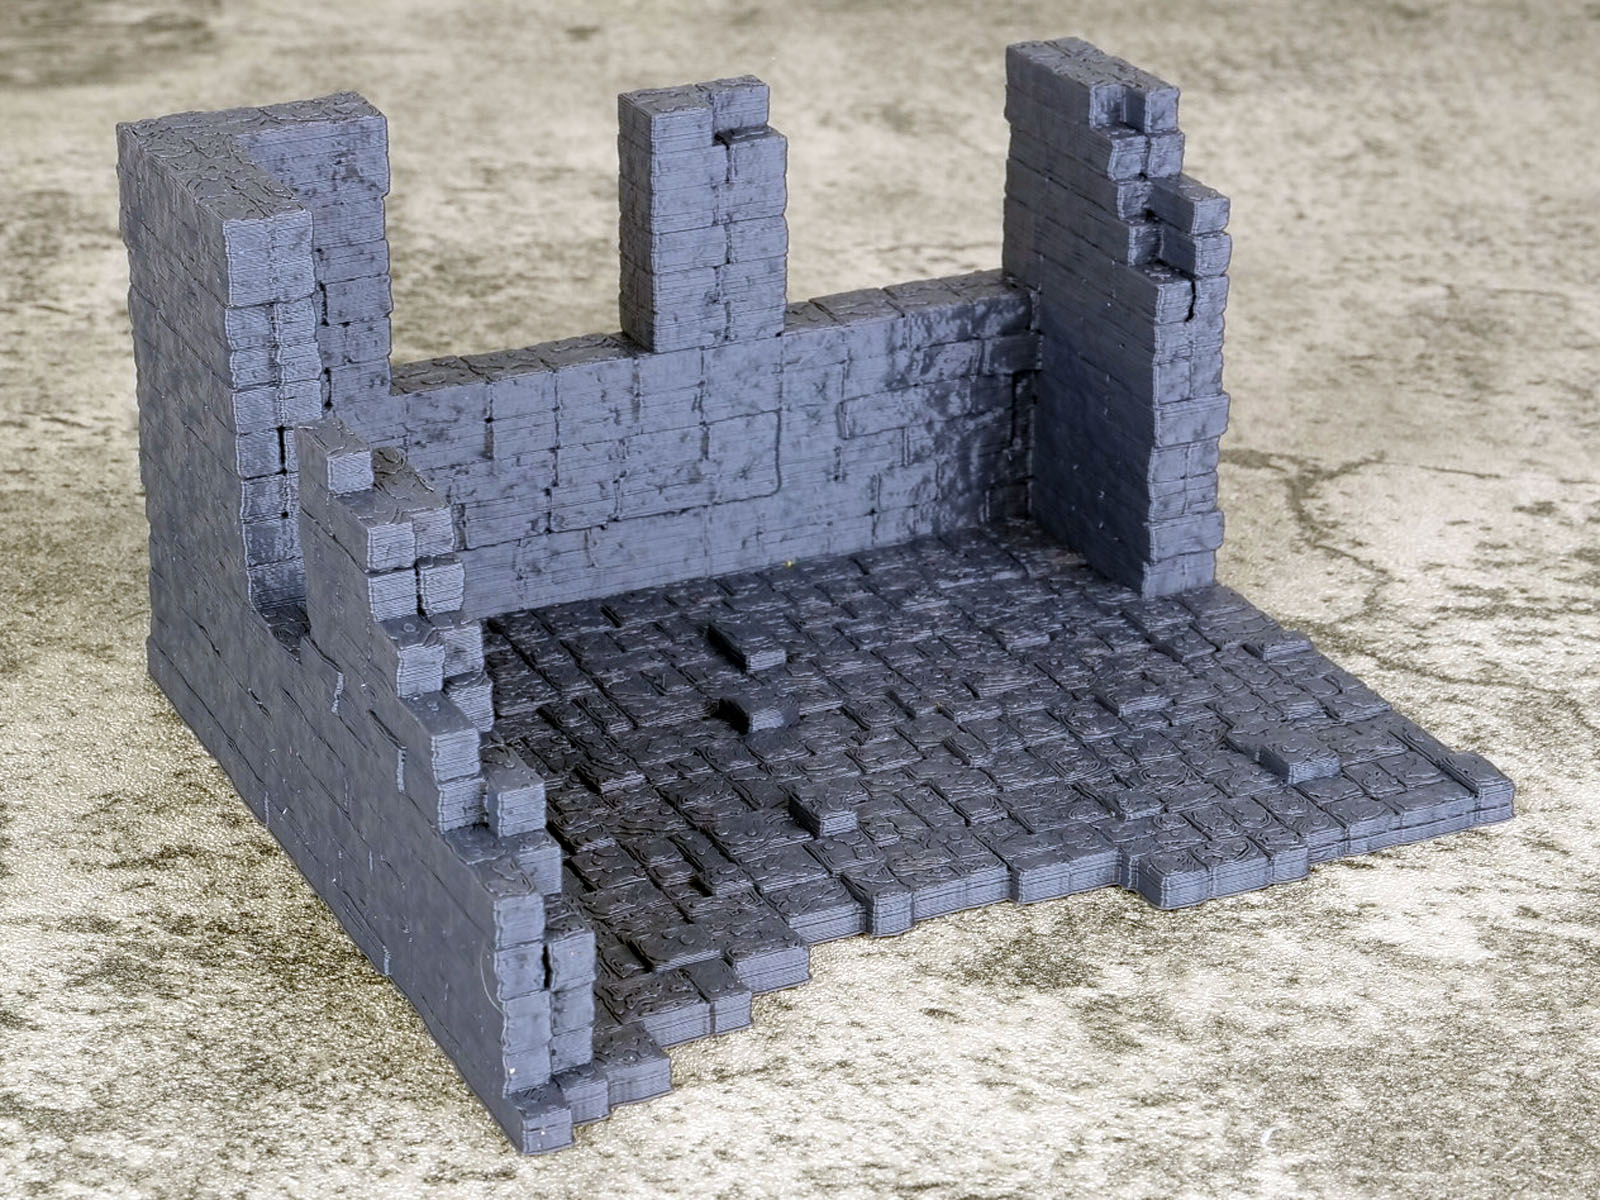 Ruined Building 4, Ashborne, Suitable for 28mm wargaming